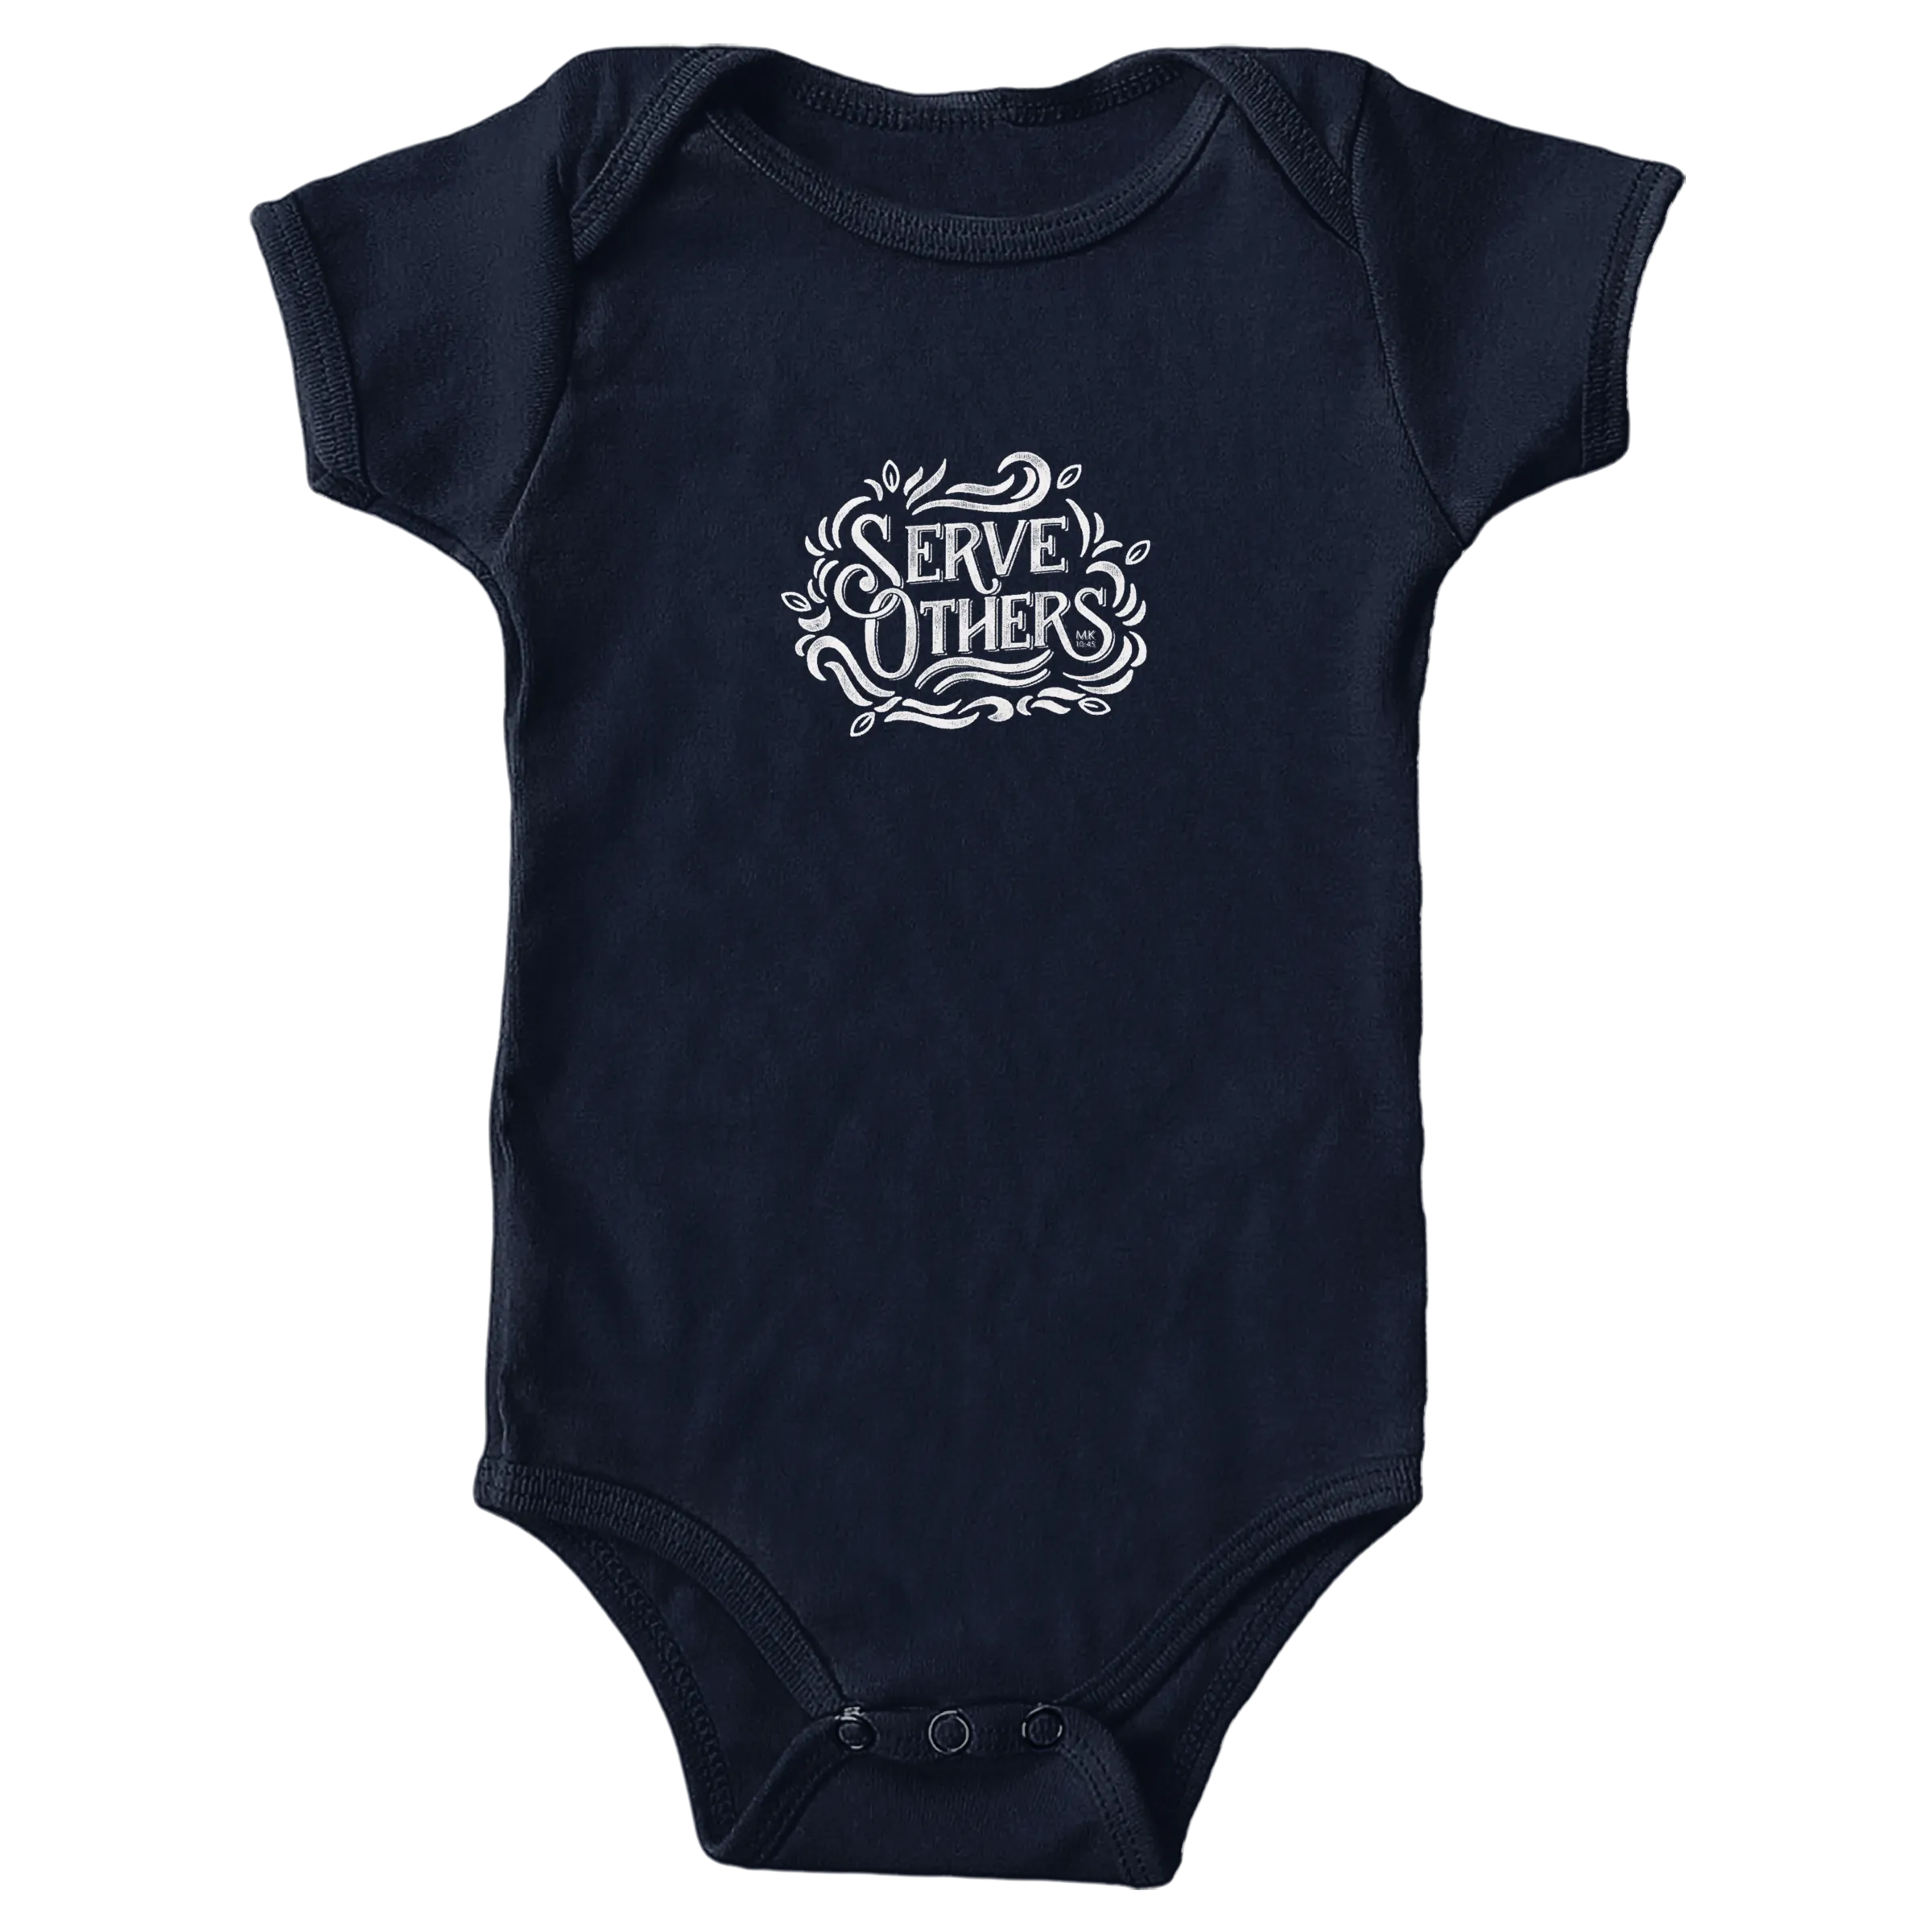 Revenge Baby Clothes & Accessories - CafePress